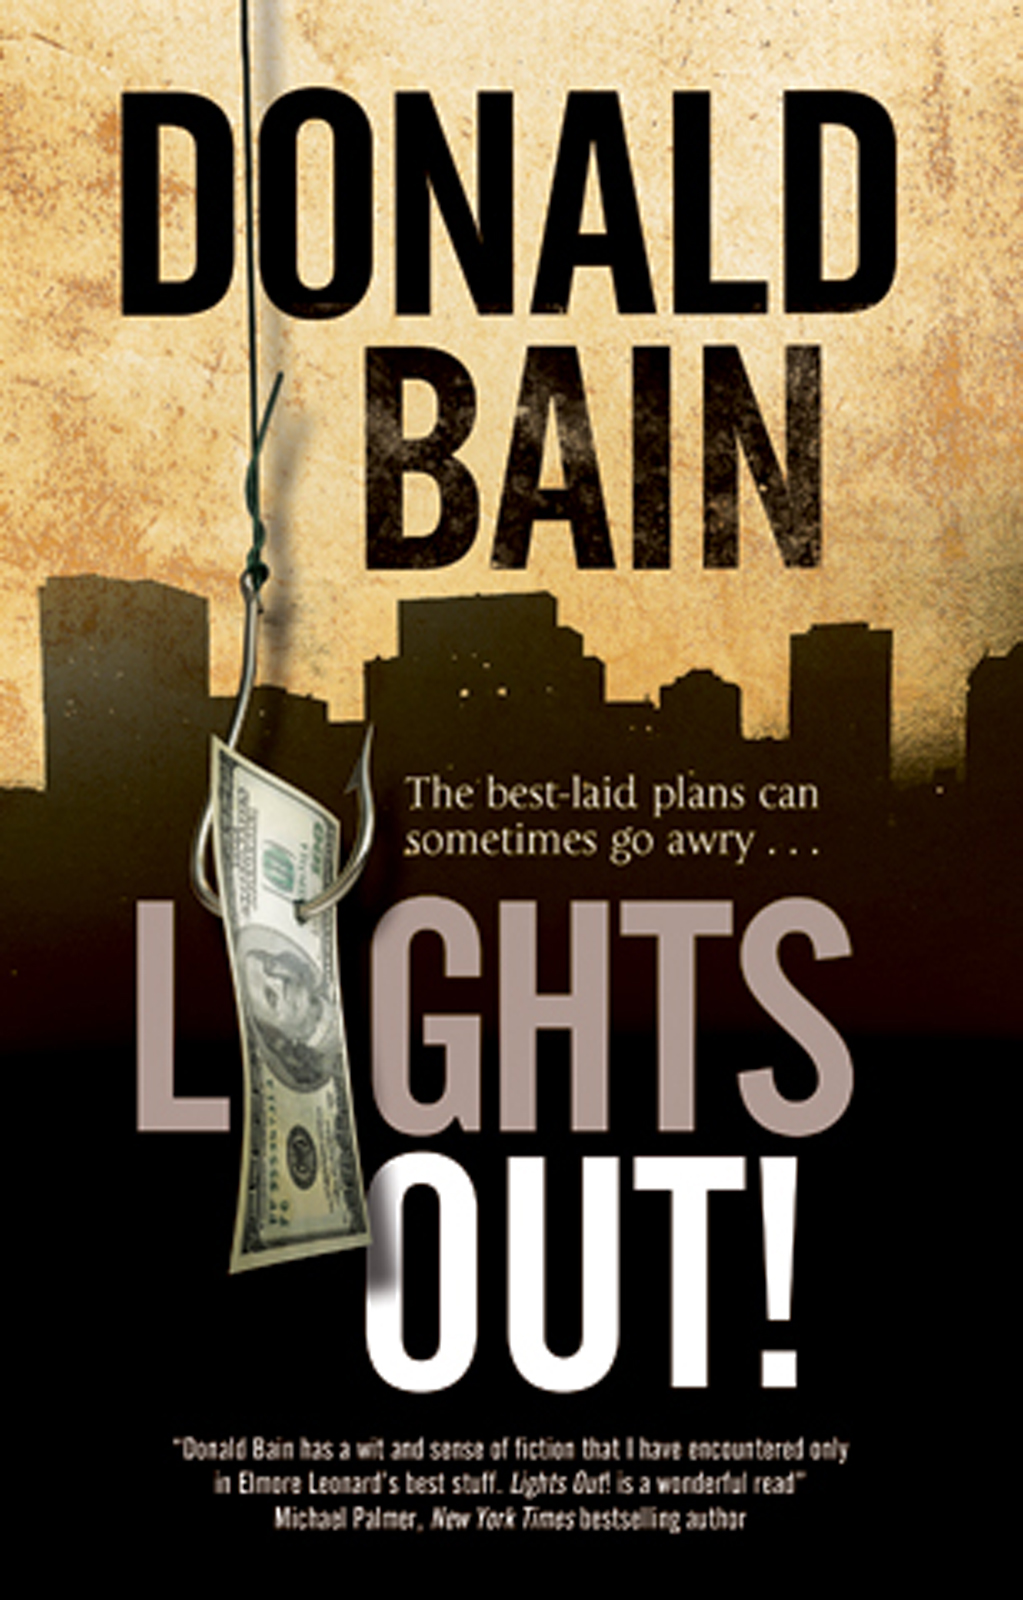 Lights Out!--A heist thriller involving the Mafia (2014) by Donald Bain